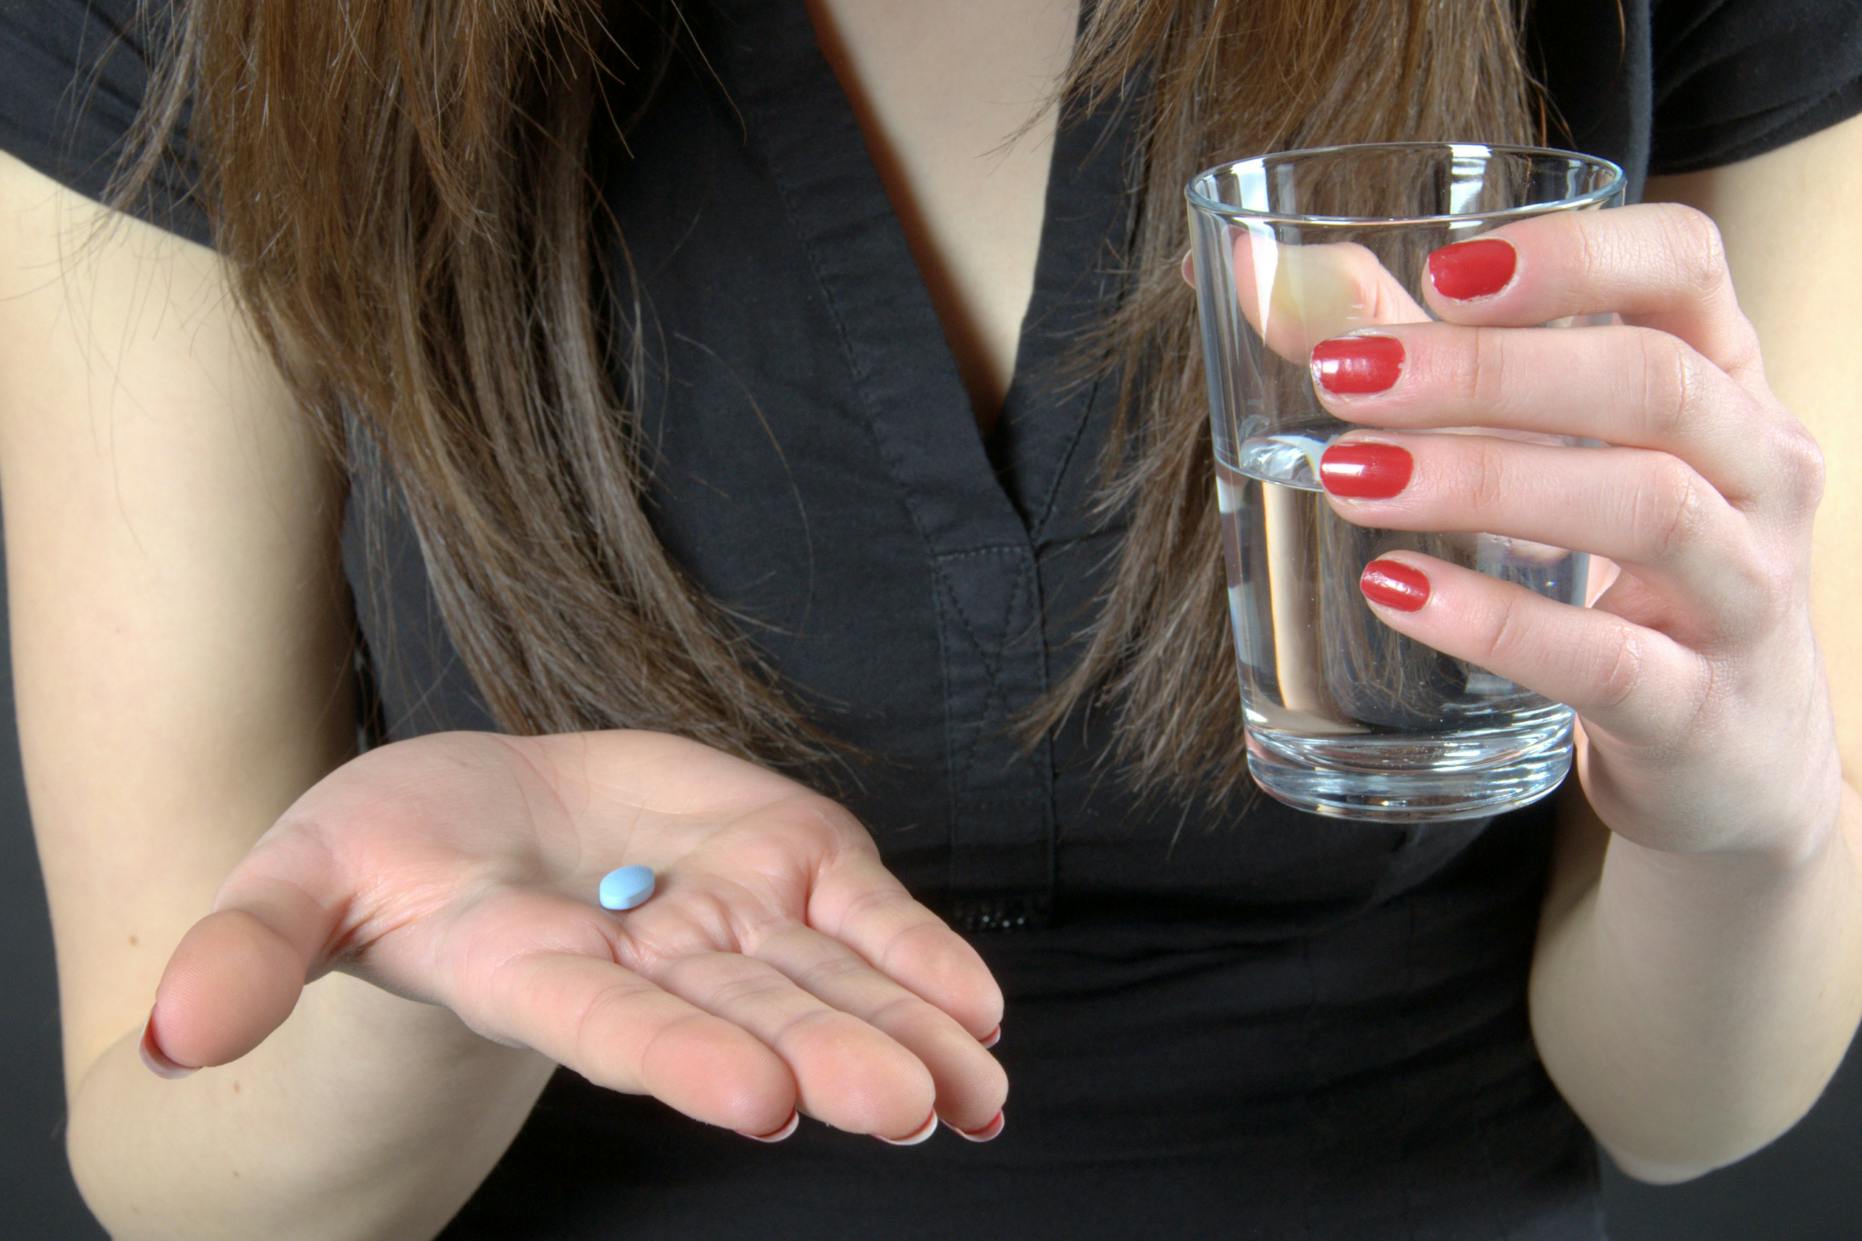 Someone holding a glass of water about to take a blue tablet medication